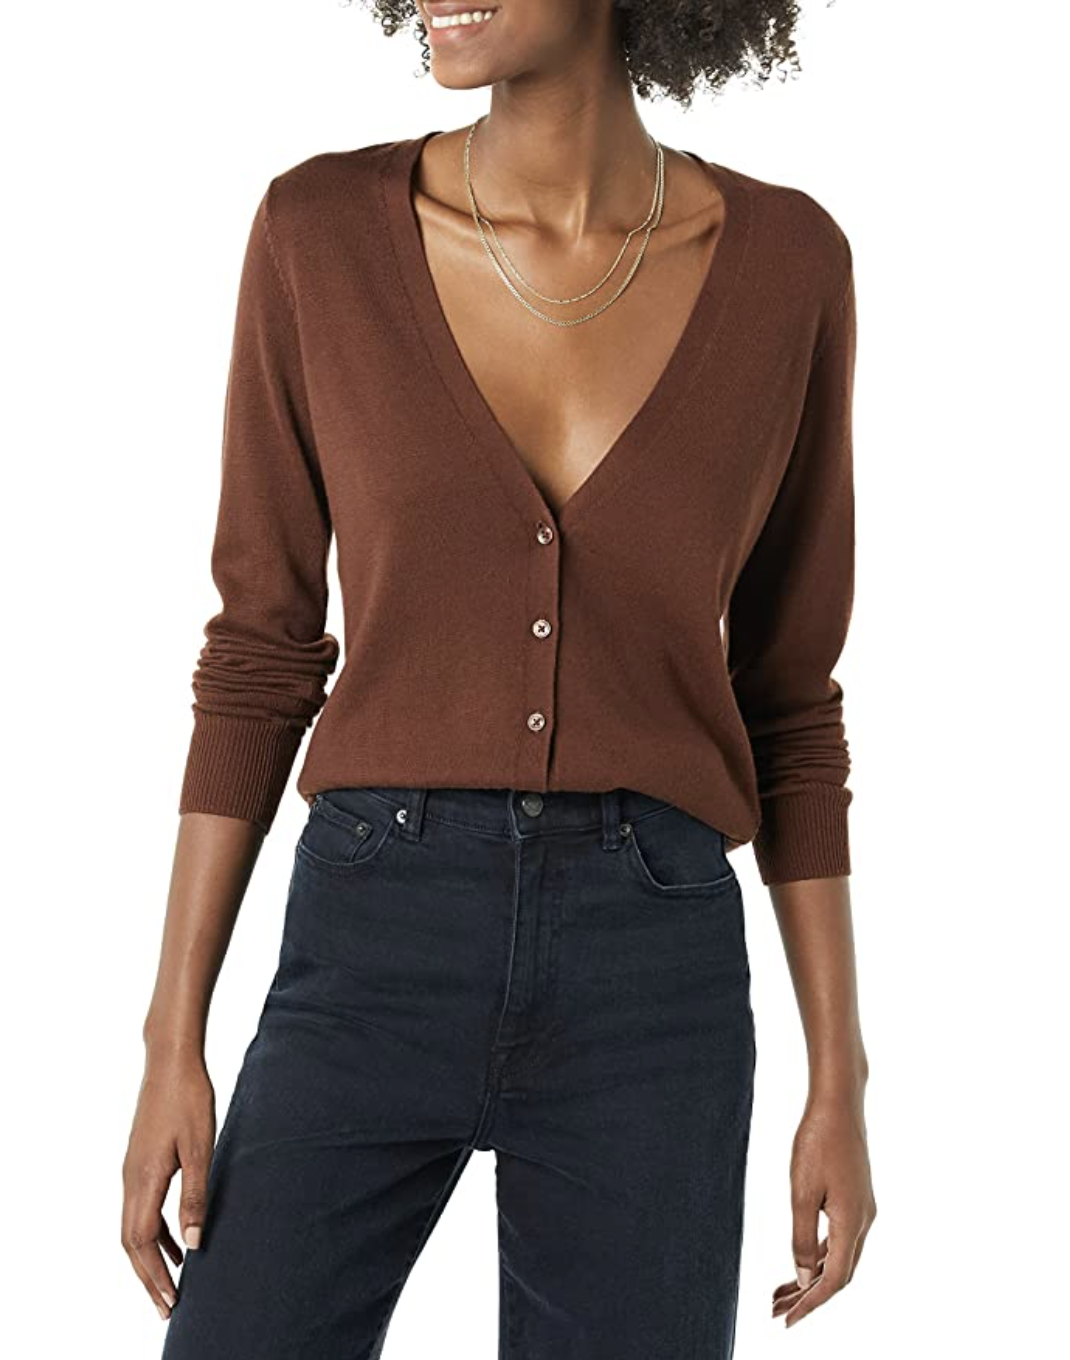 Amazon Essentials $22 Cardigan Is an Ideal Year-Round Layering Knit